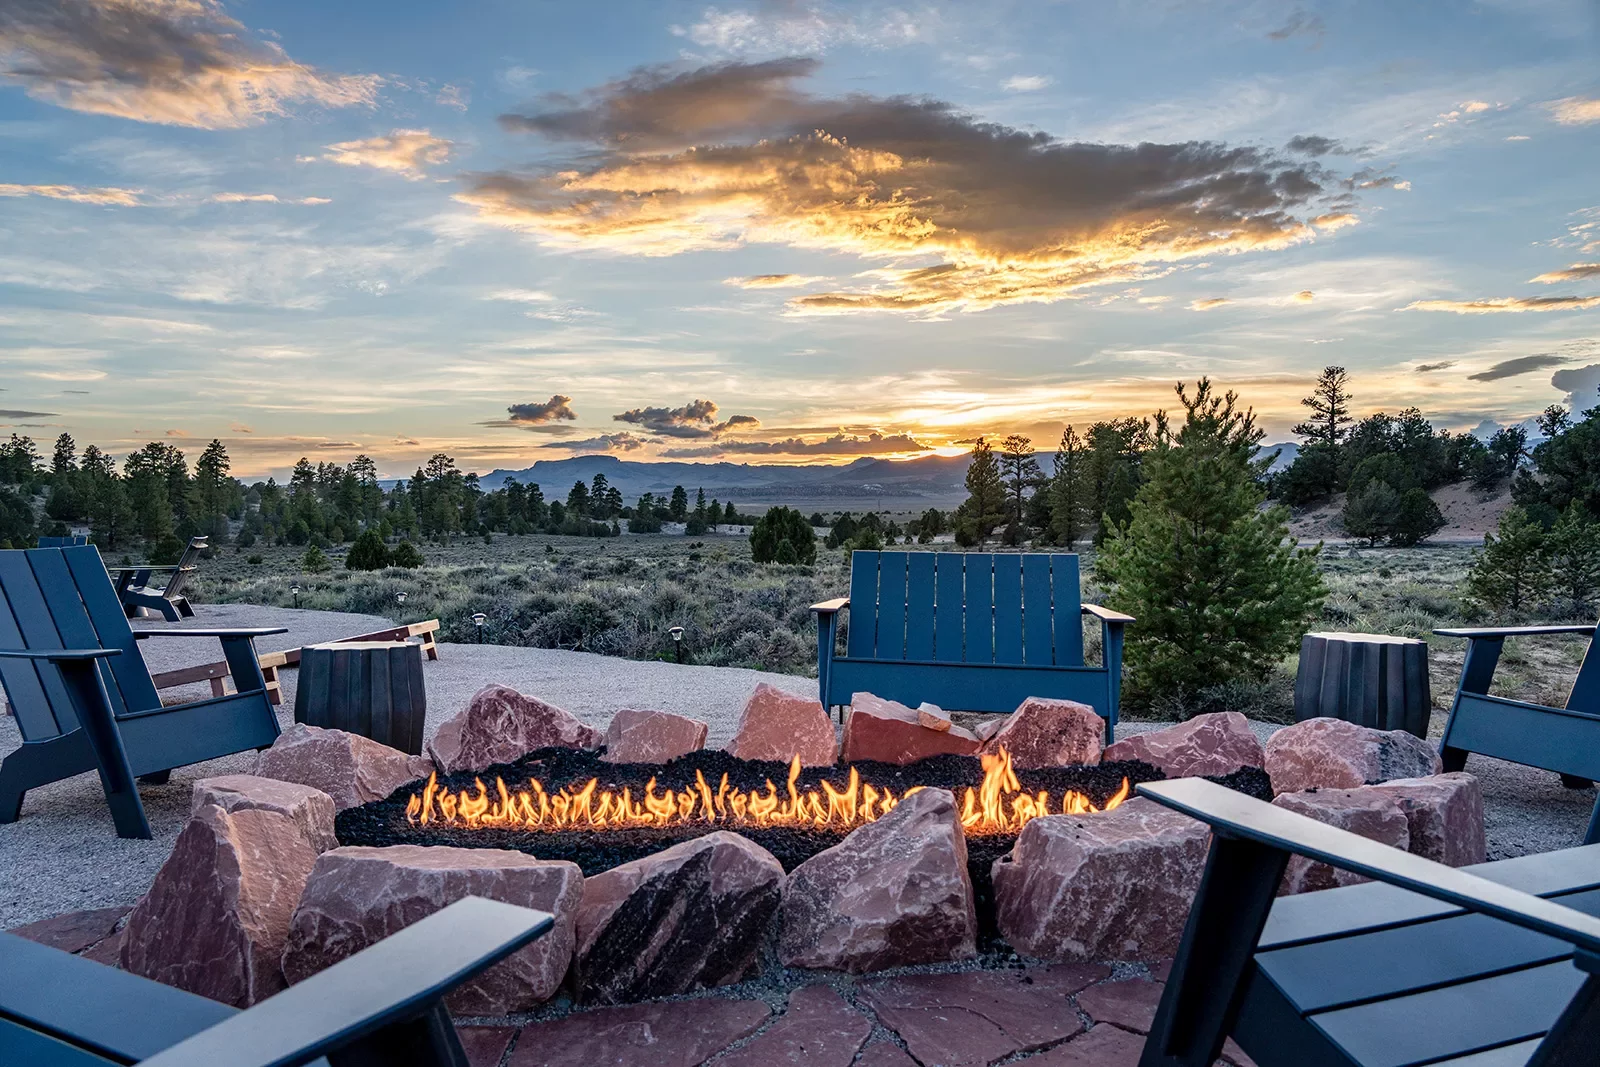 An outdoor fire pit at sunset